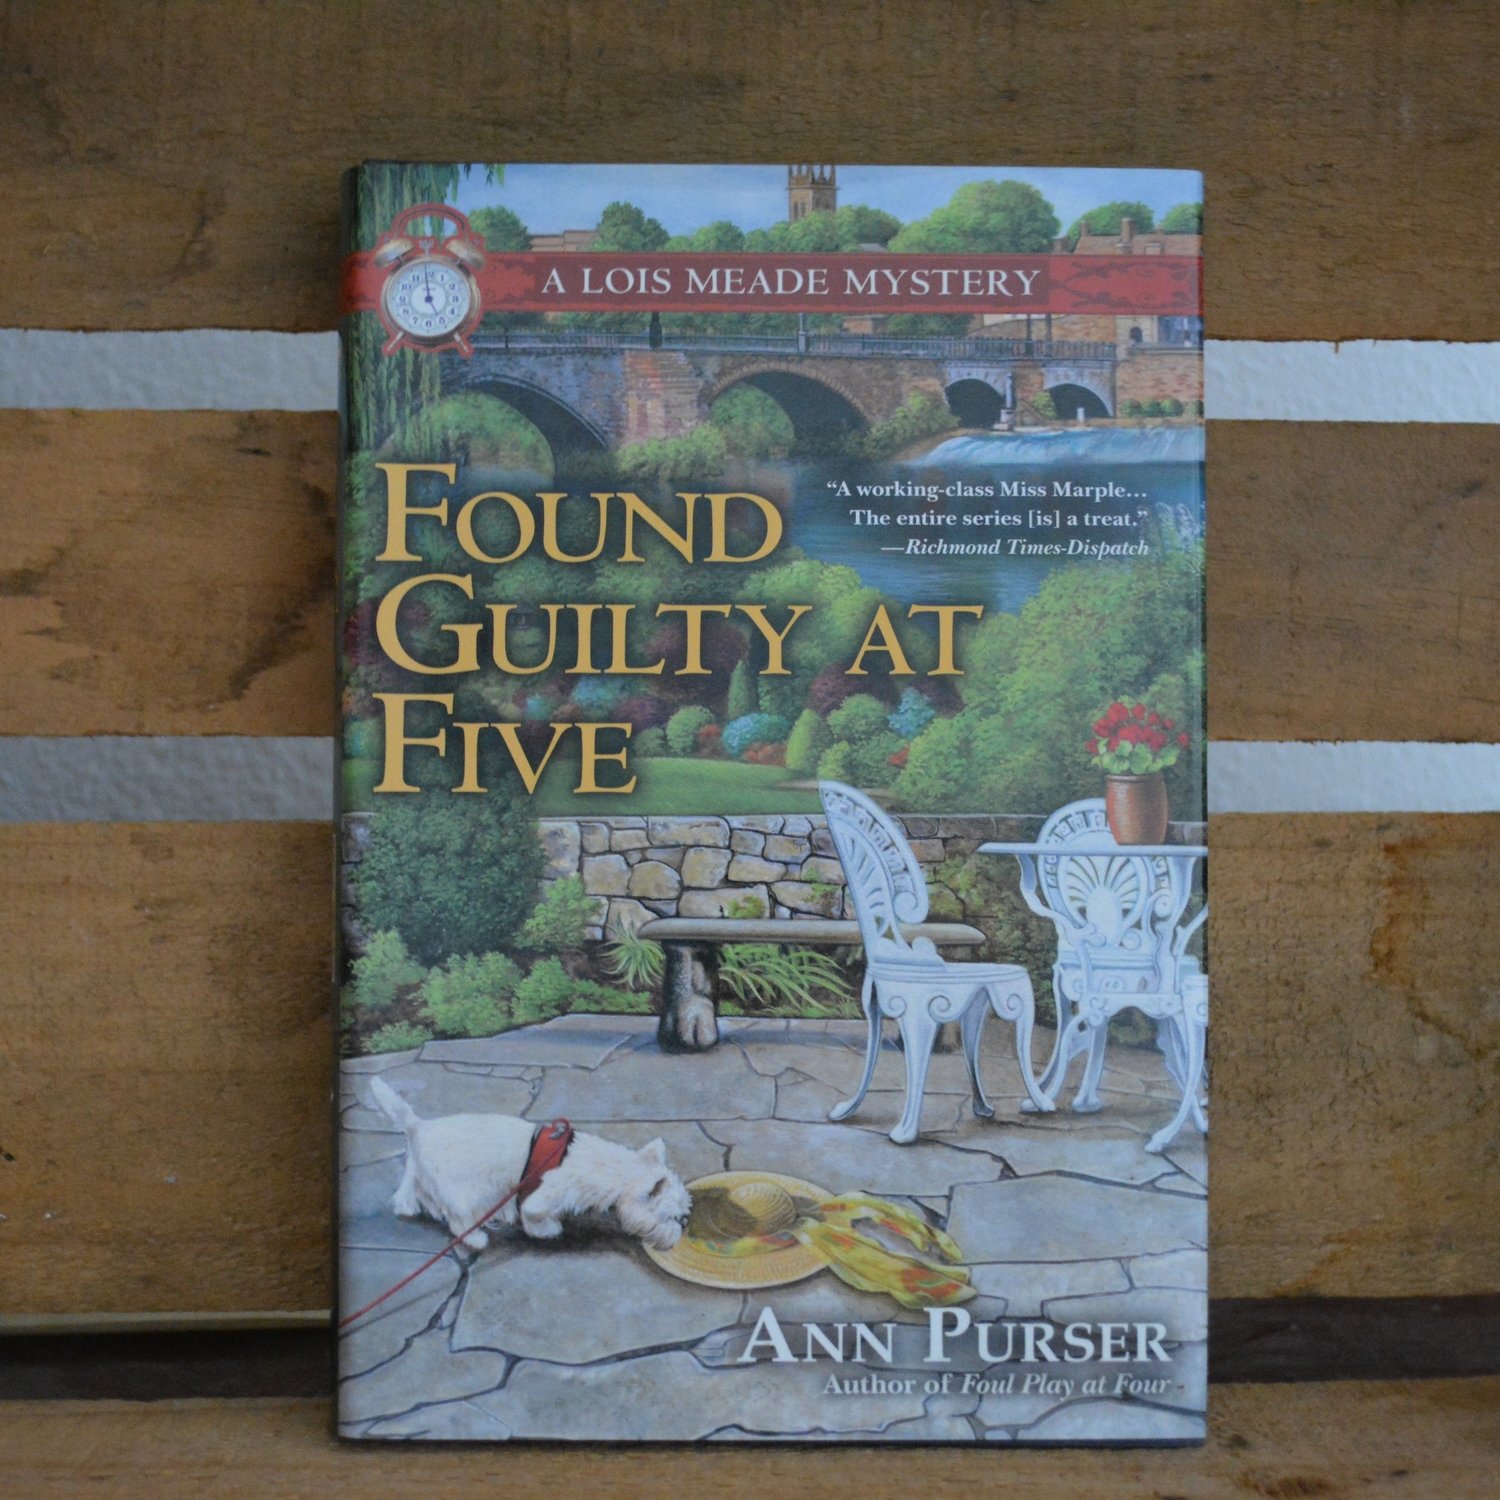 Found Guilty at Five by Ann Purser